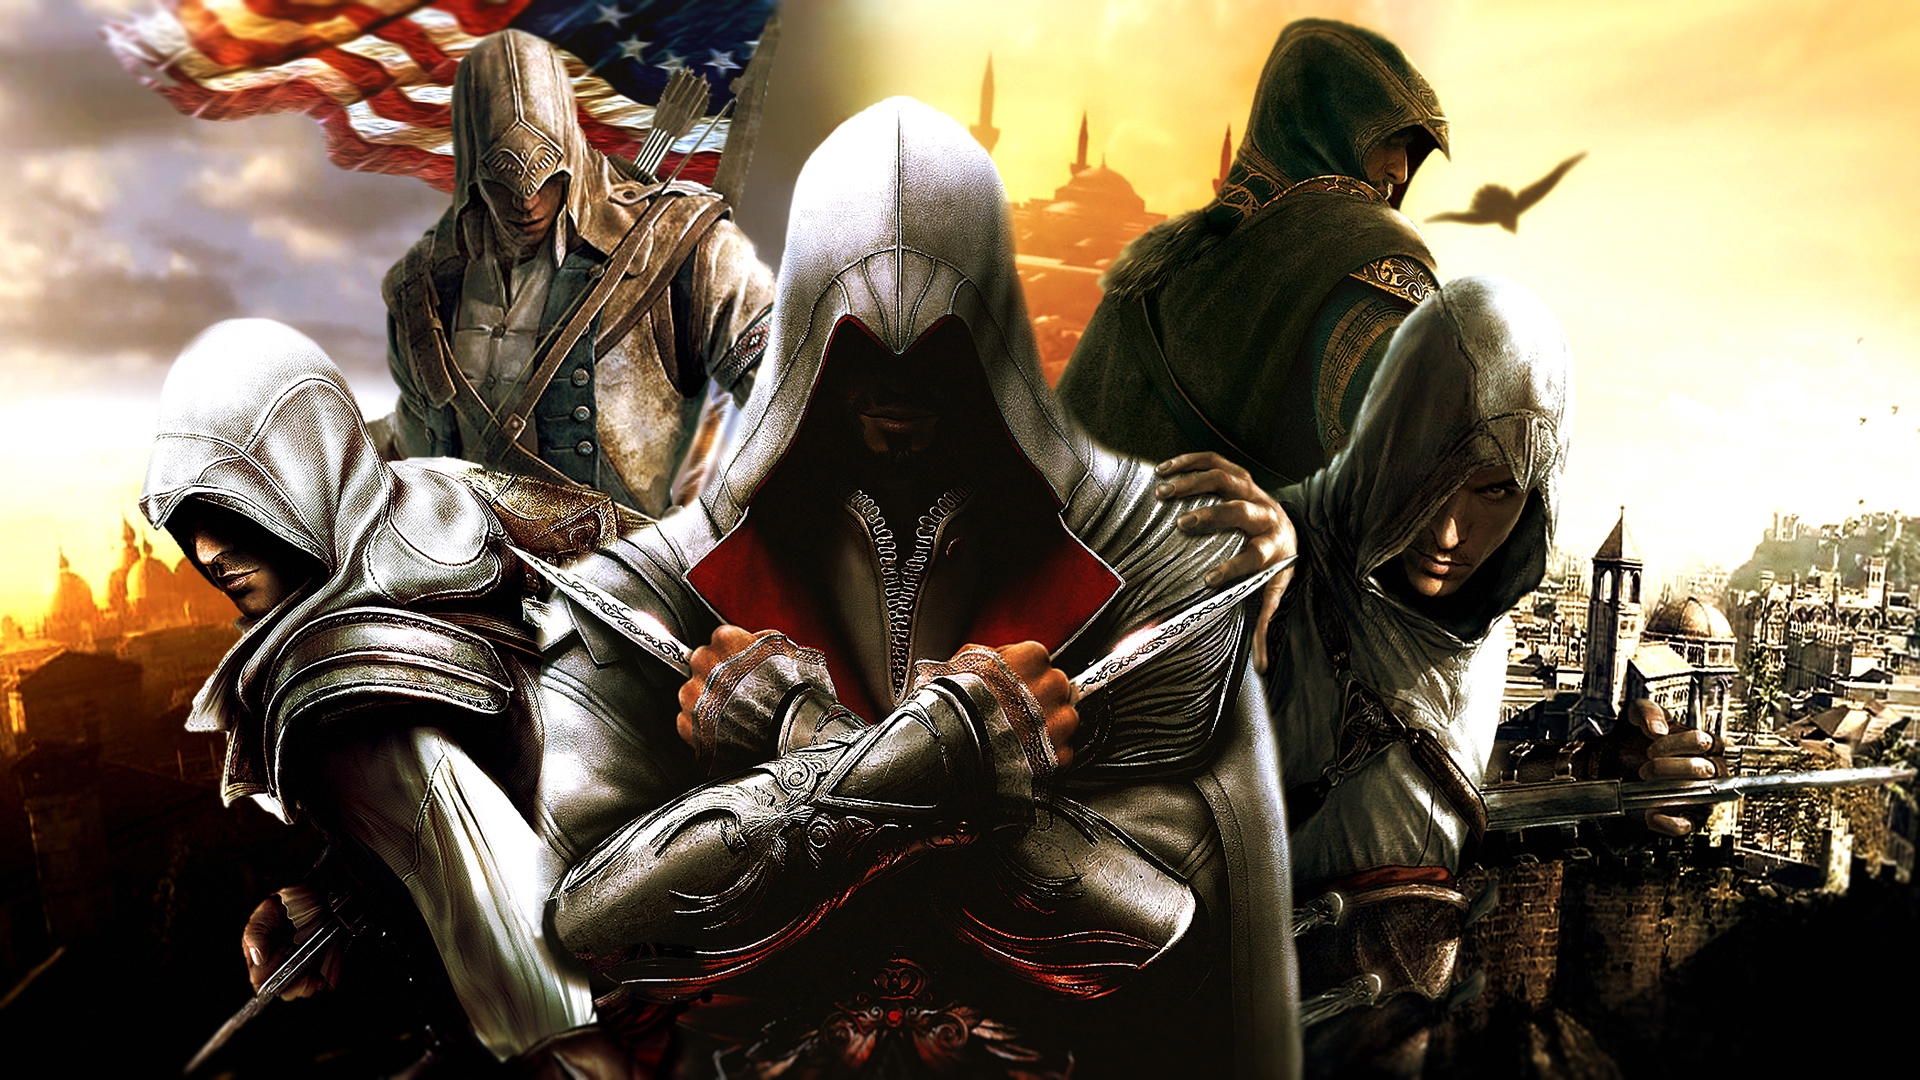 Amazing Assassins Creed 4 HD Wallpaper Image For PC Your PC Desktop